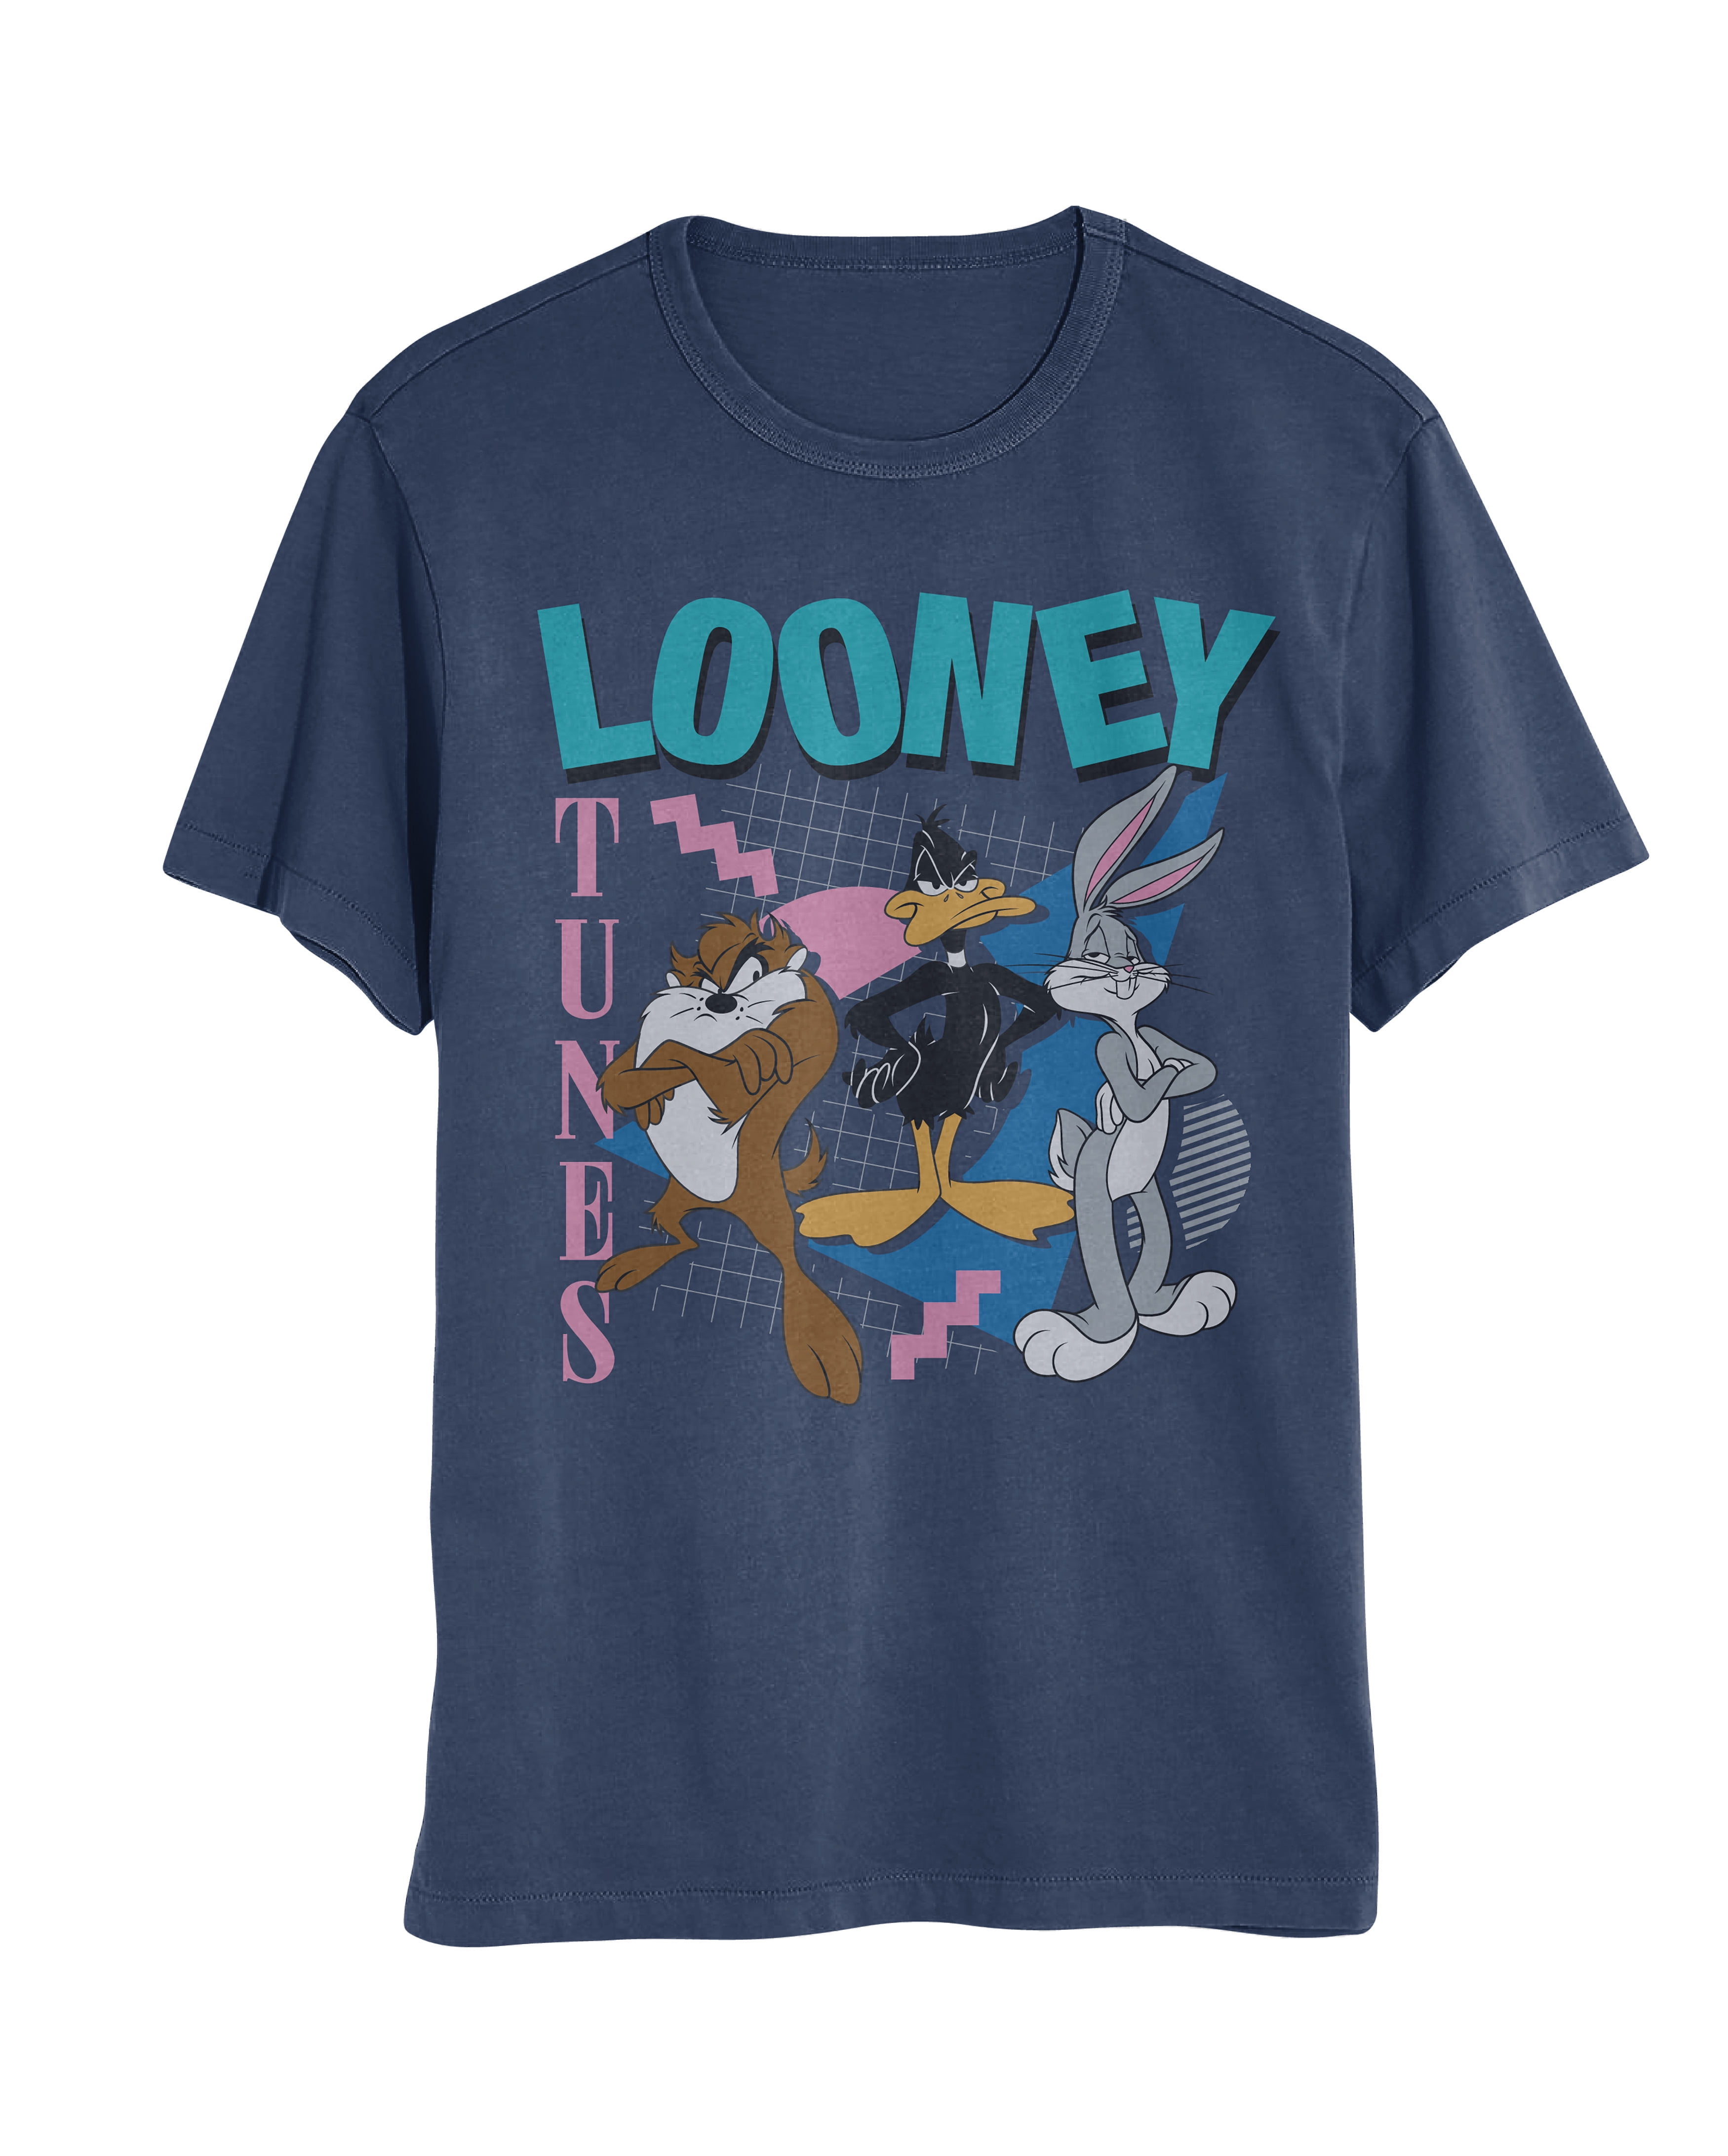 Daffy Sleeve and Mens and Womens (White, Taz, Looney Bunny Bugs S-XXL) Tunes Short T-Shirt